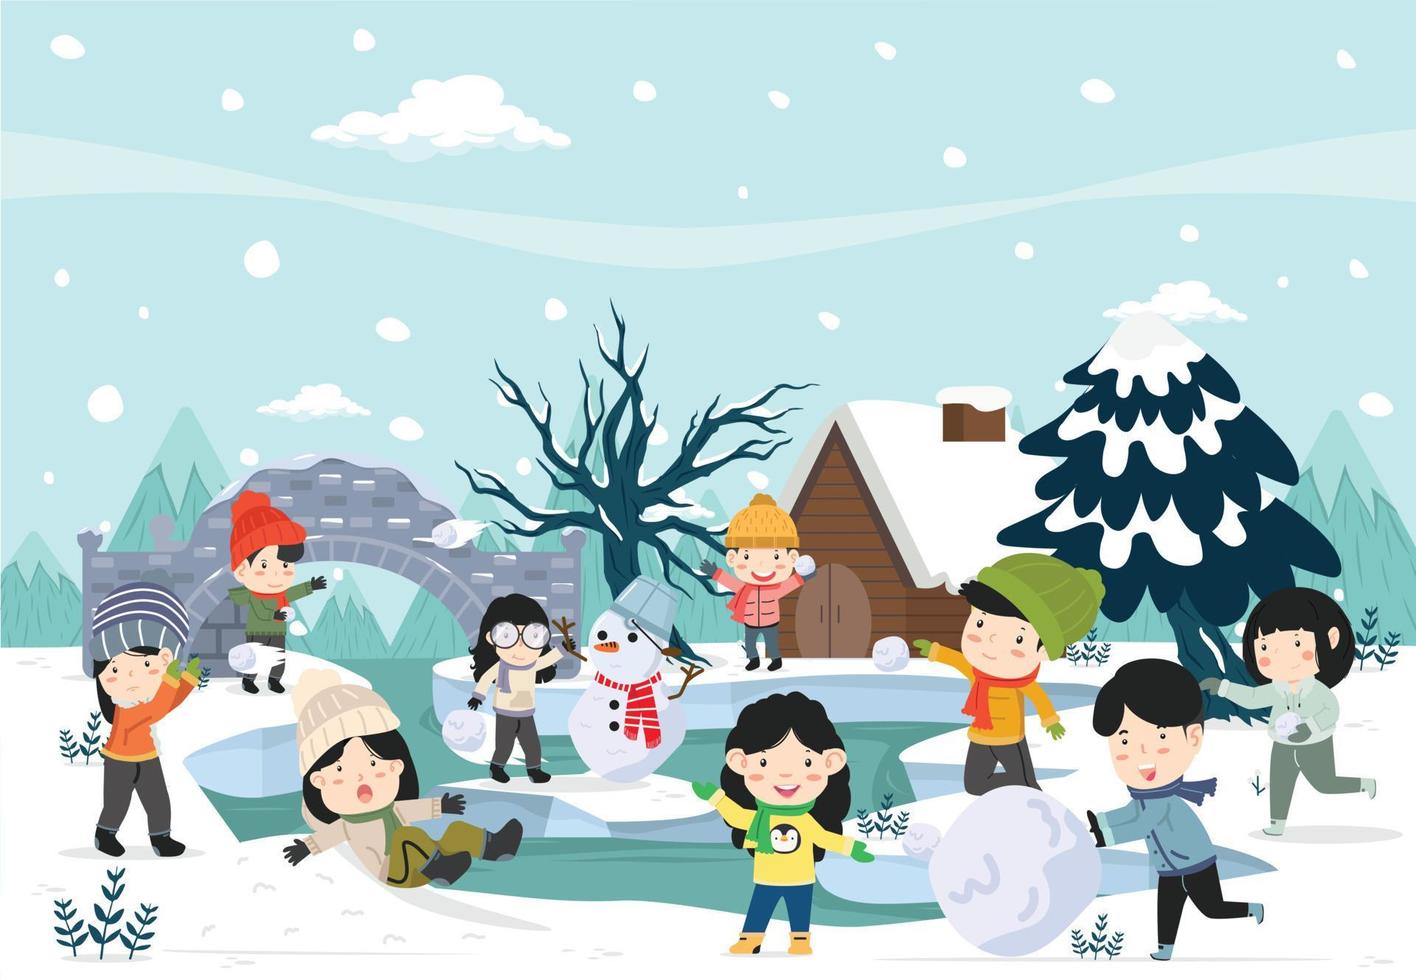 Winter Happy friends playing snowballs outdoors vector